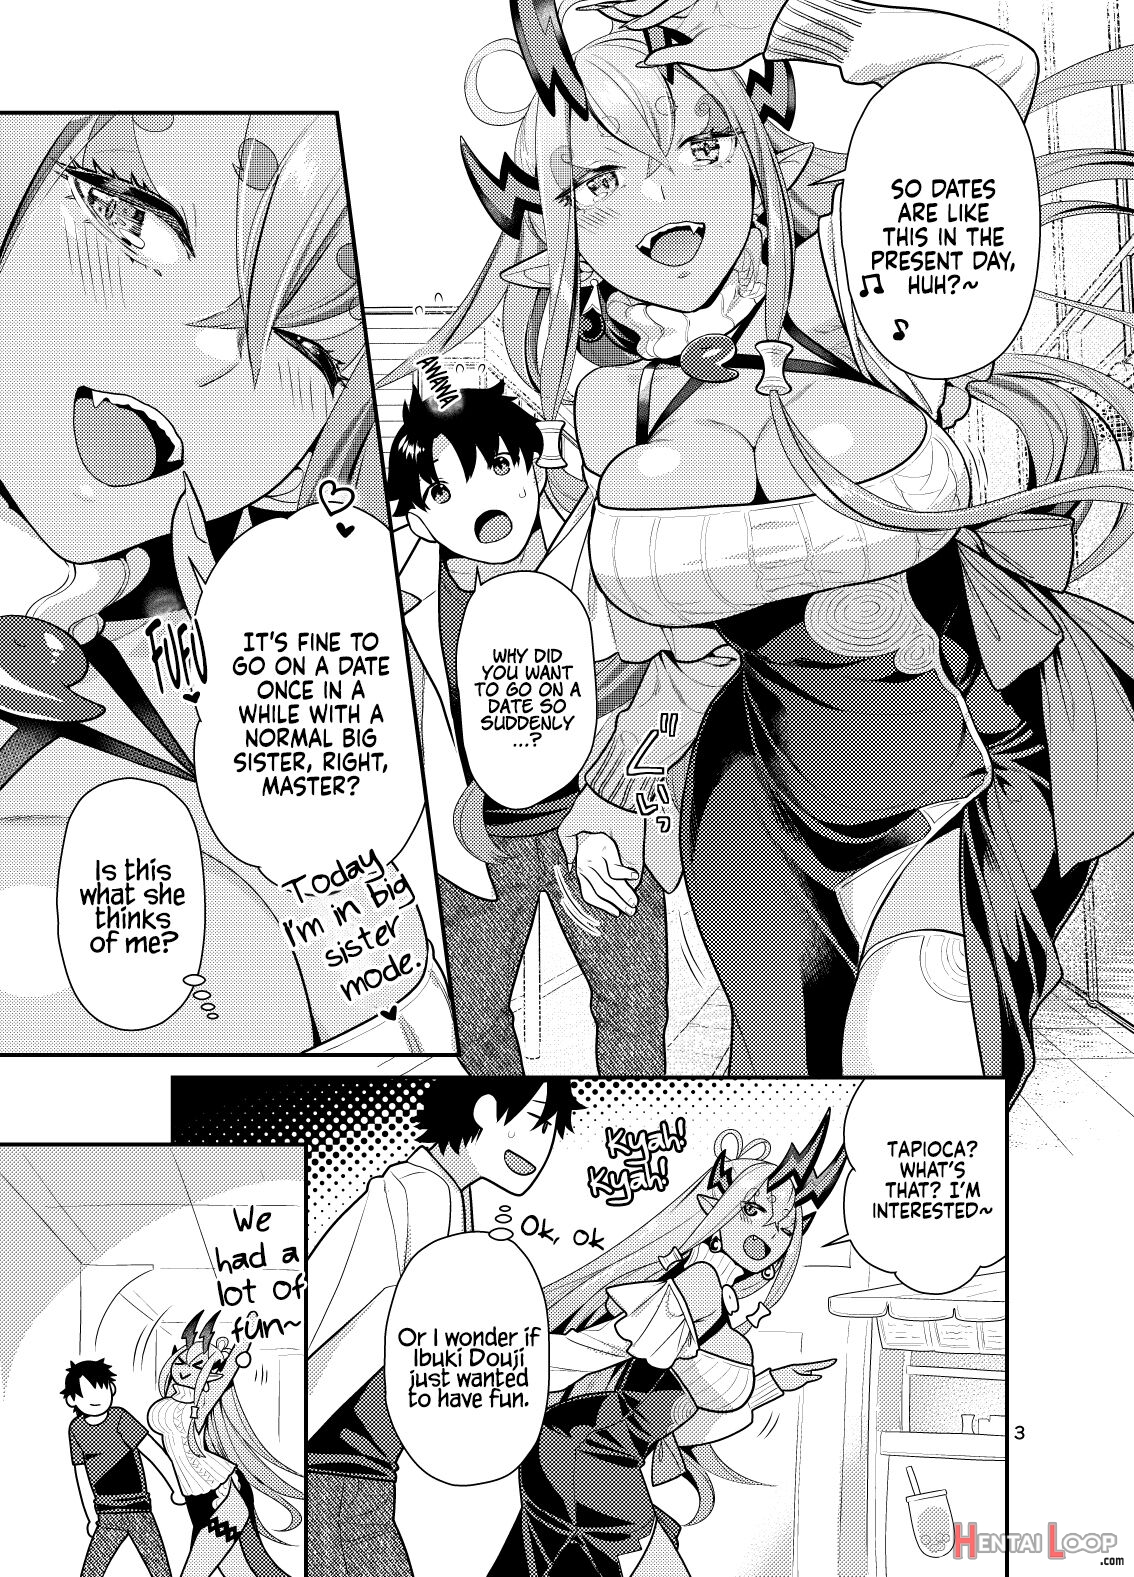 The Book About Making Out With Big Sis Ibuki page 4